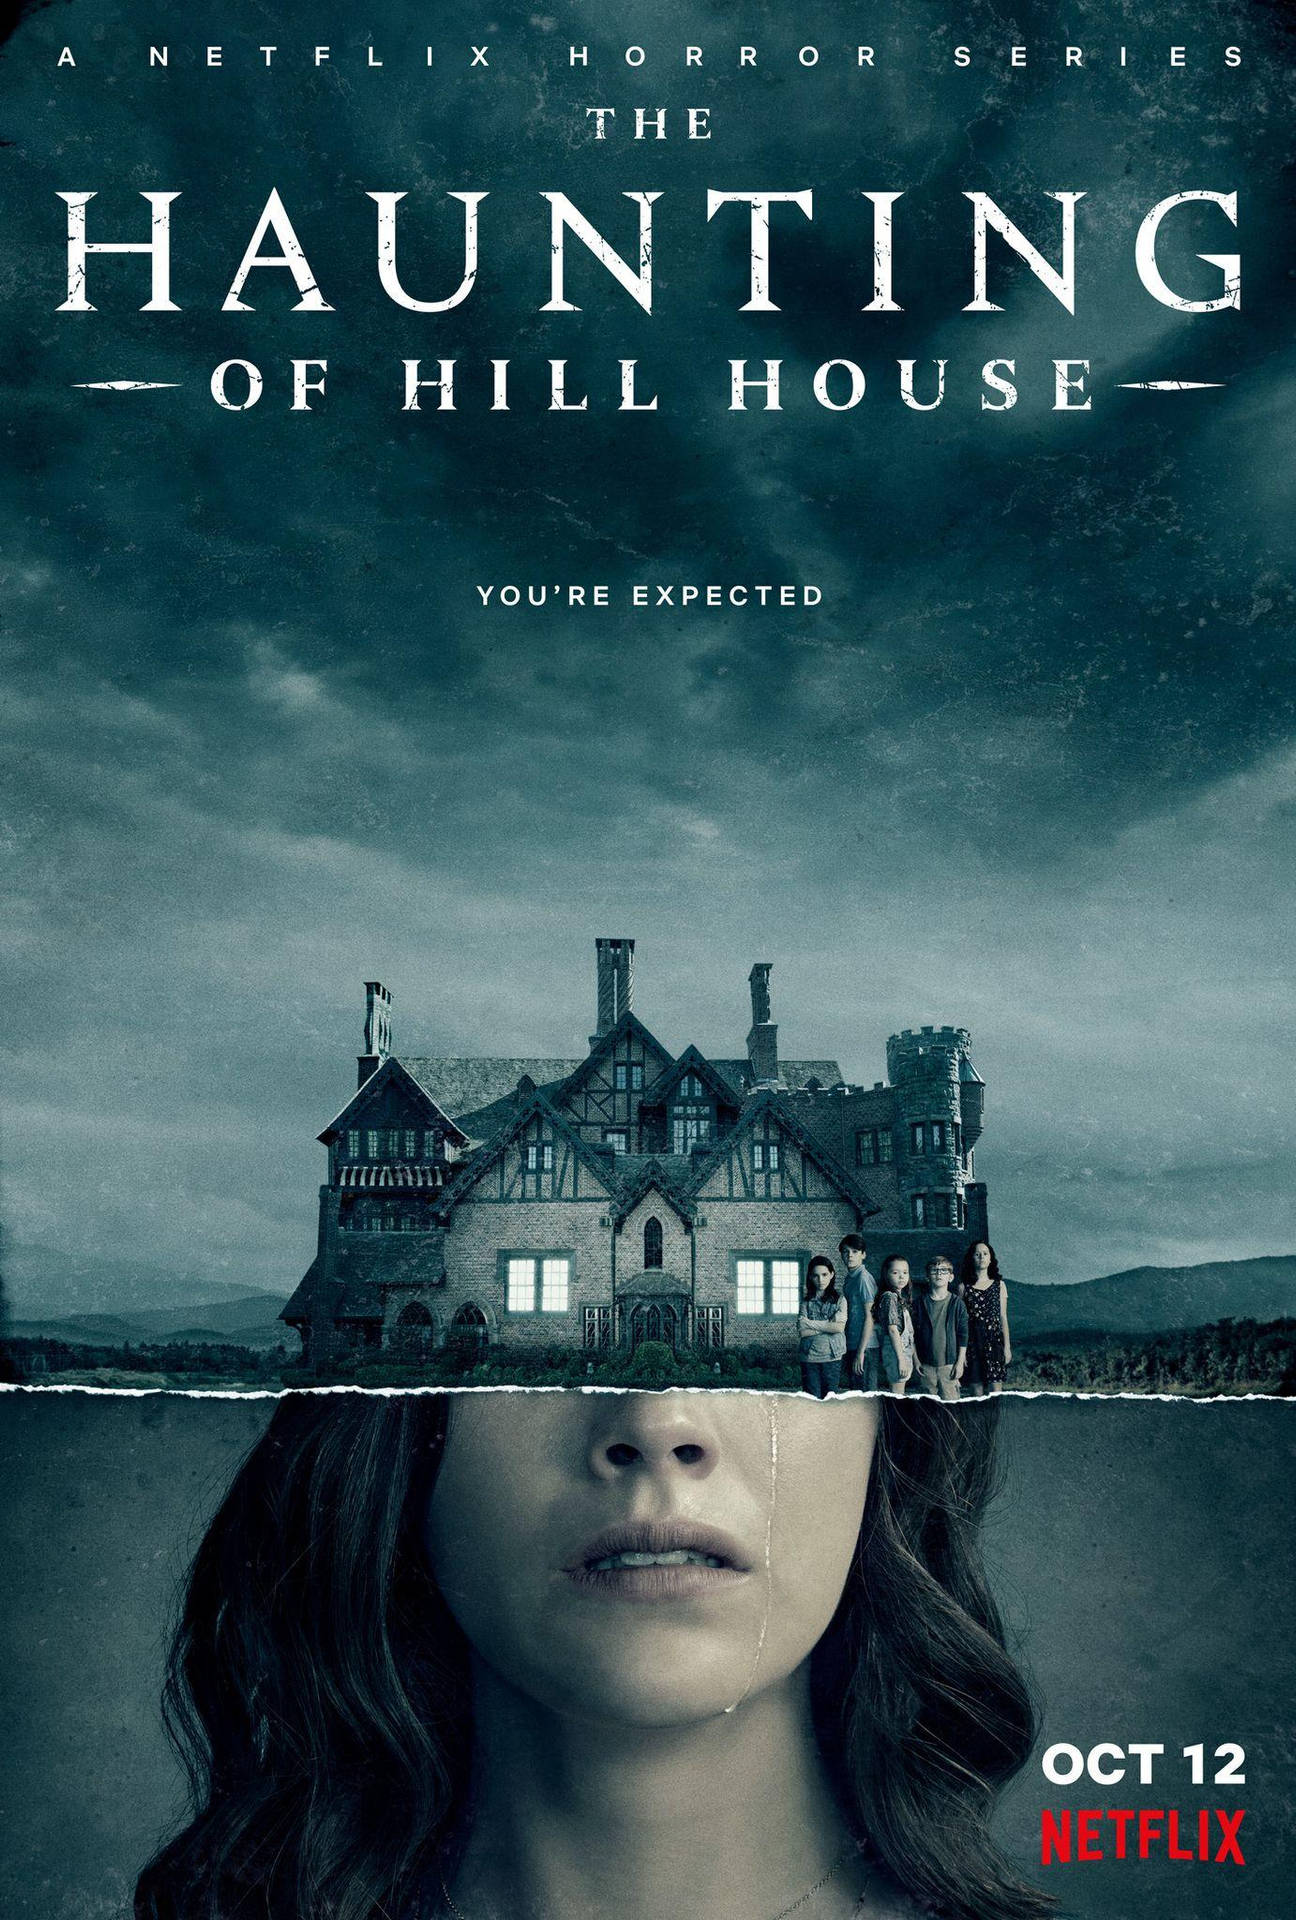 The Haunting Of Hill House Horror Series Wallpaper